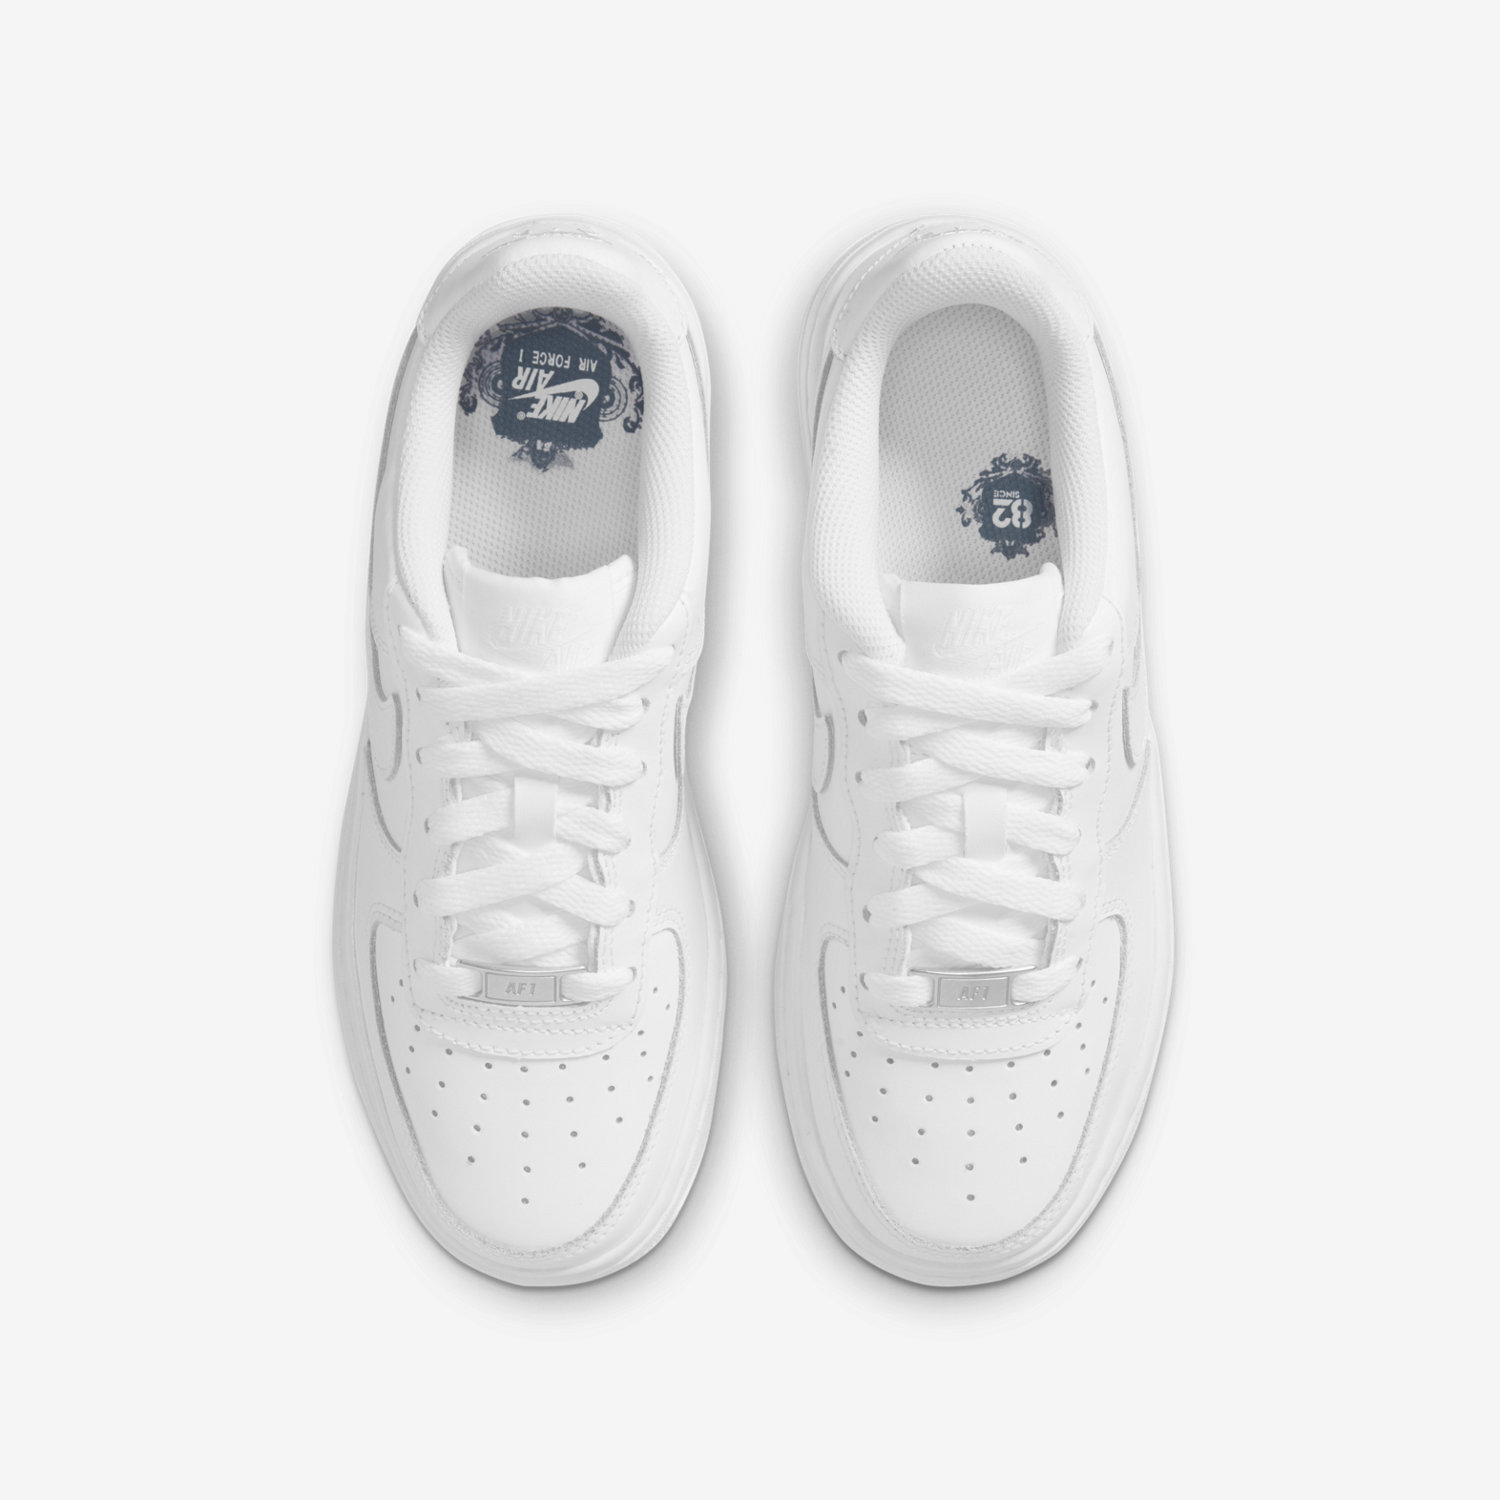 Buy Online nike air force 1 size 4 